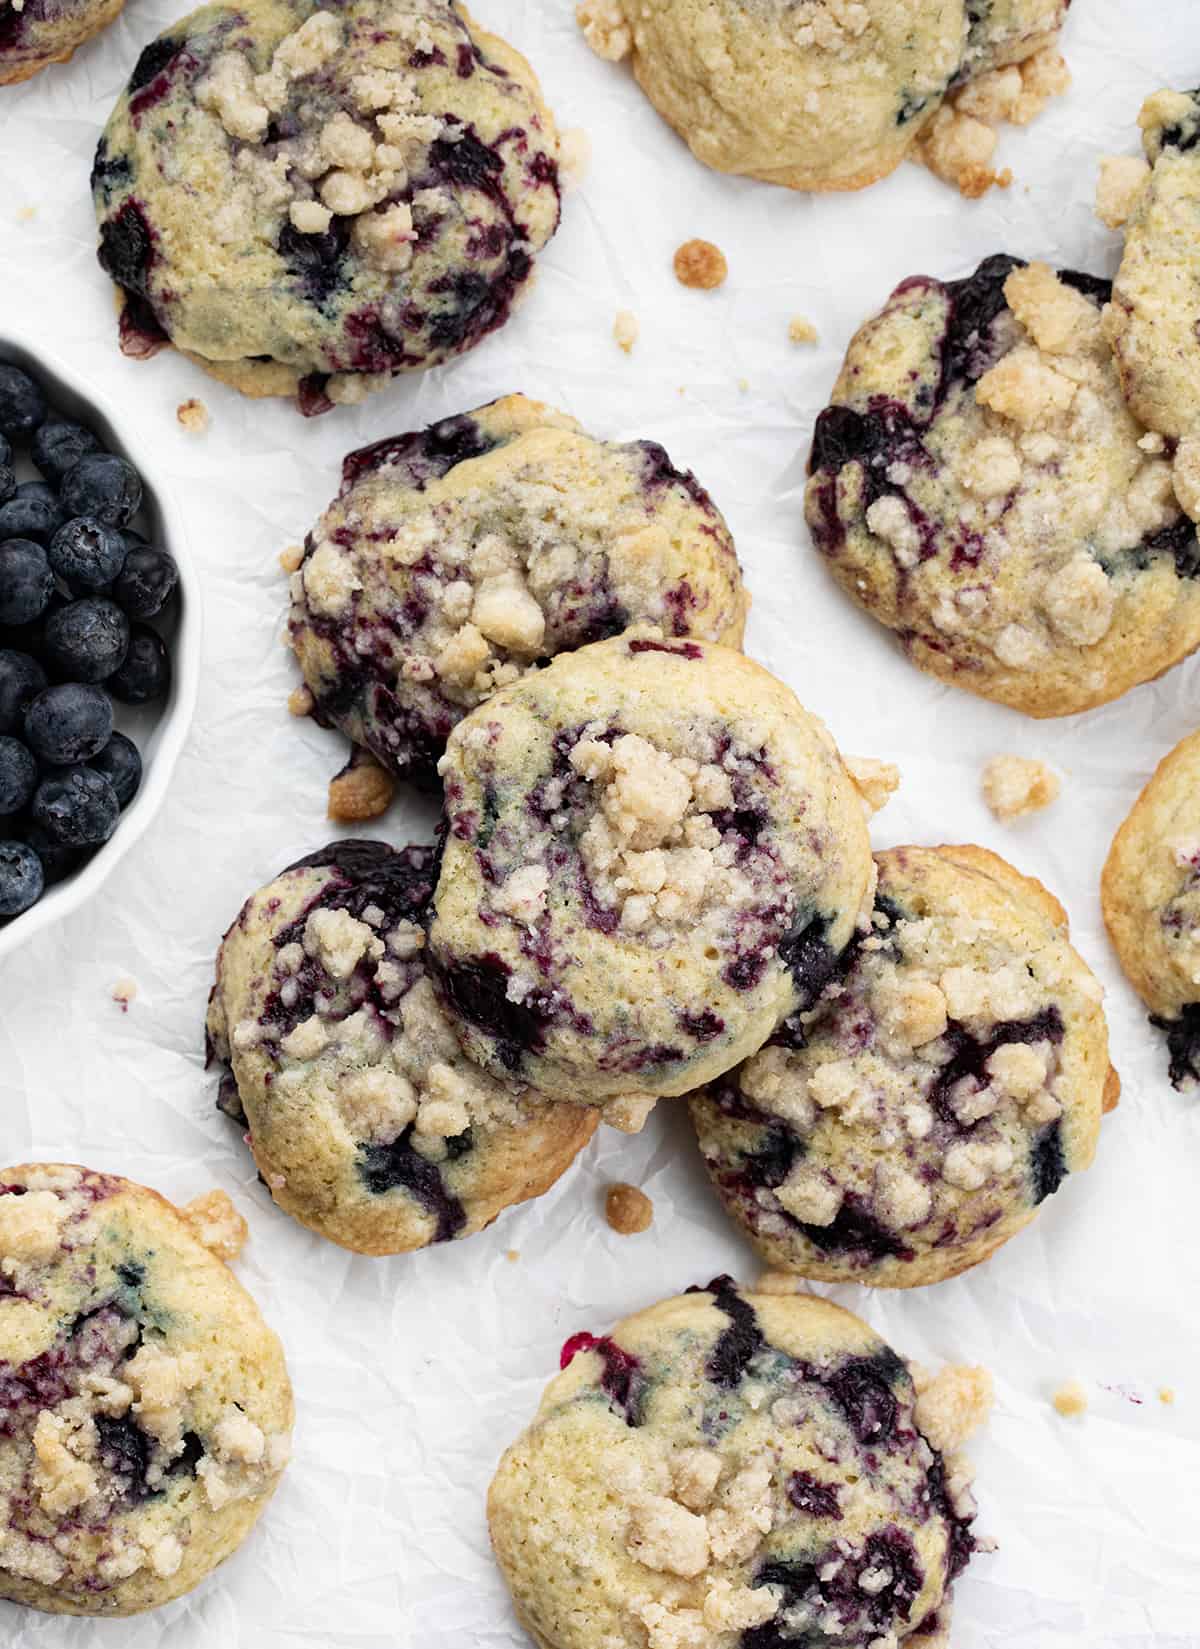 Blueberry Crumble Cake Cookies on White Parchment Next to Fresh Blueberries.